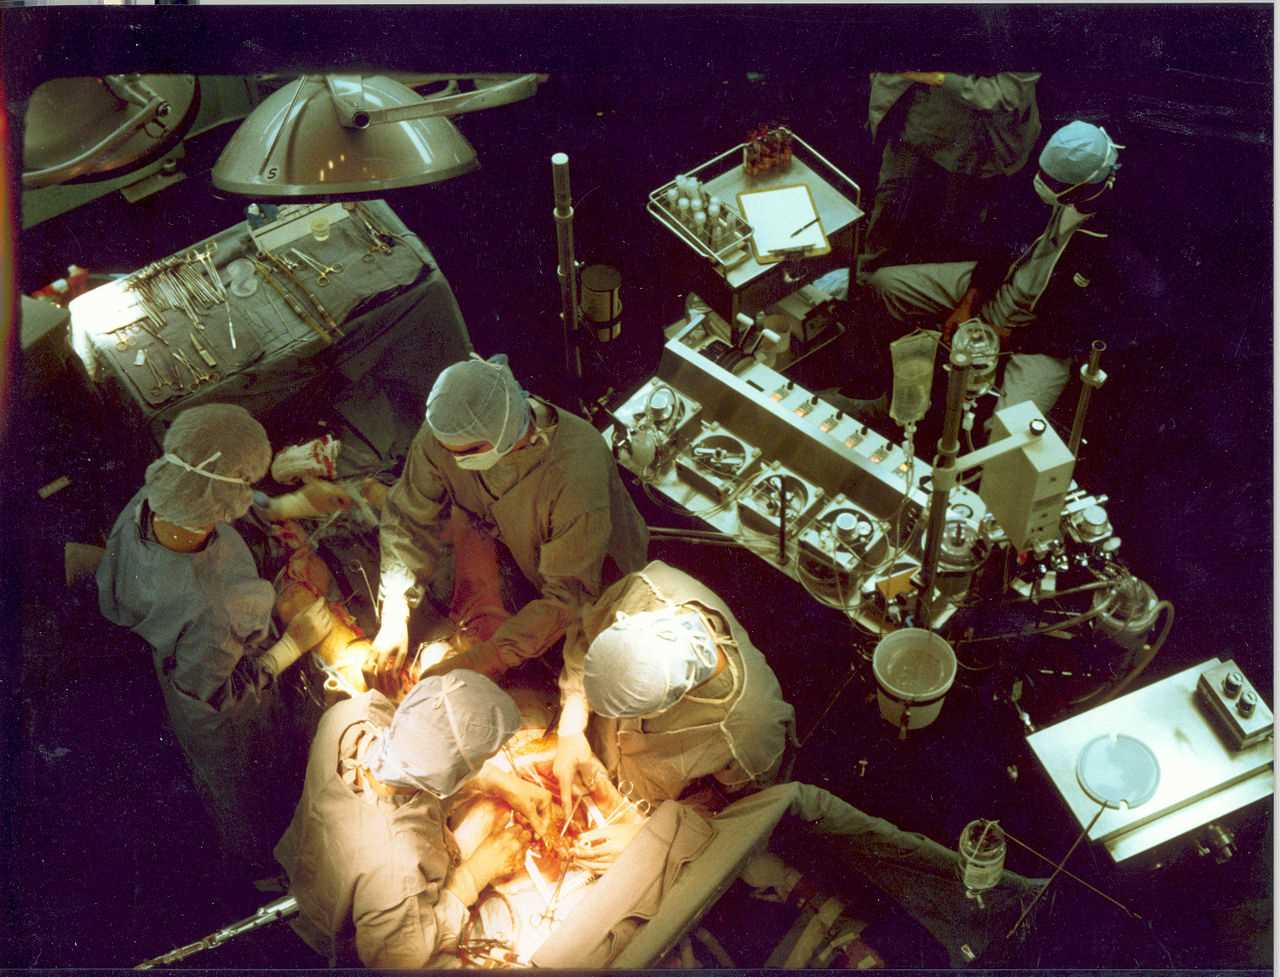 <p>Early in a coronary artery bypass operation, during vein harvesting from the legs (left of image) and the establishment of cardiopulmonary bypass by placement of an aortic cannula (bottom of image)